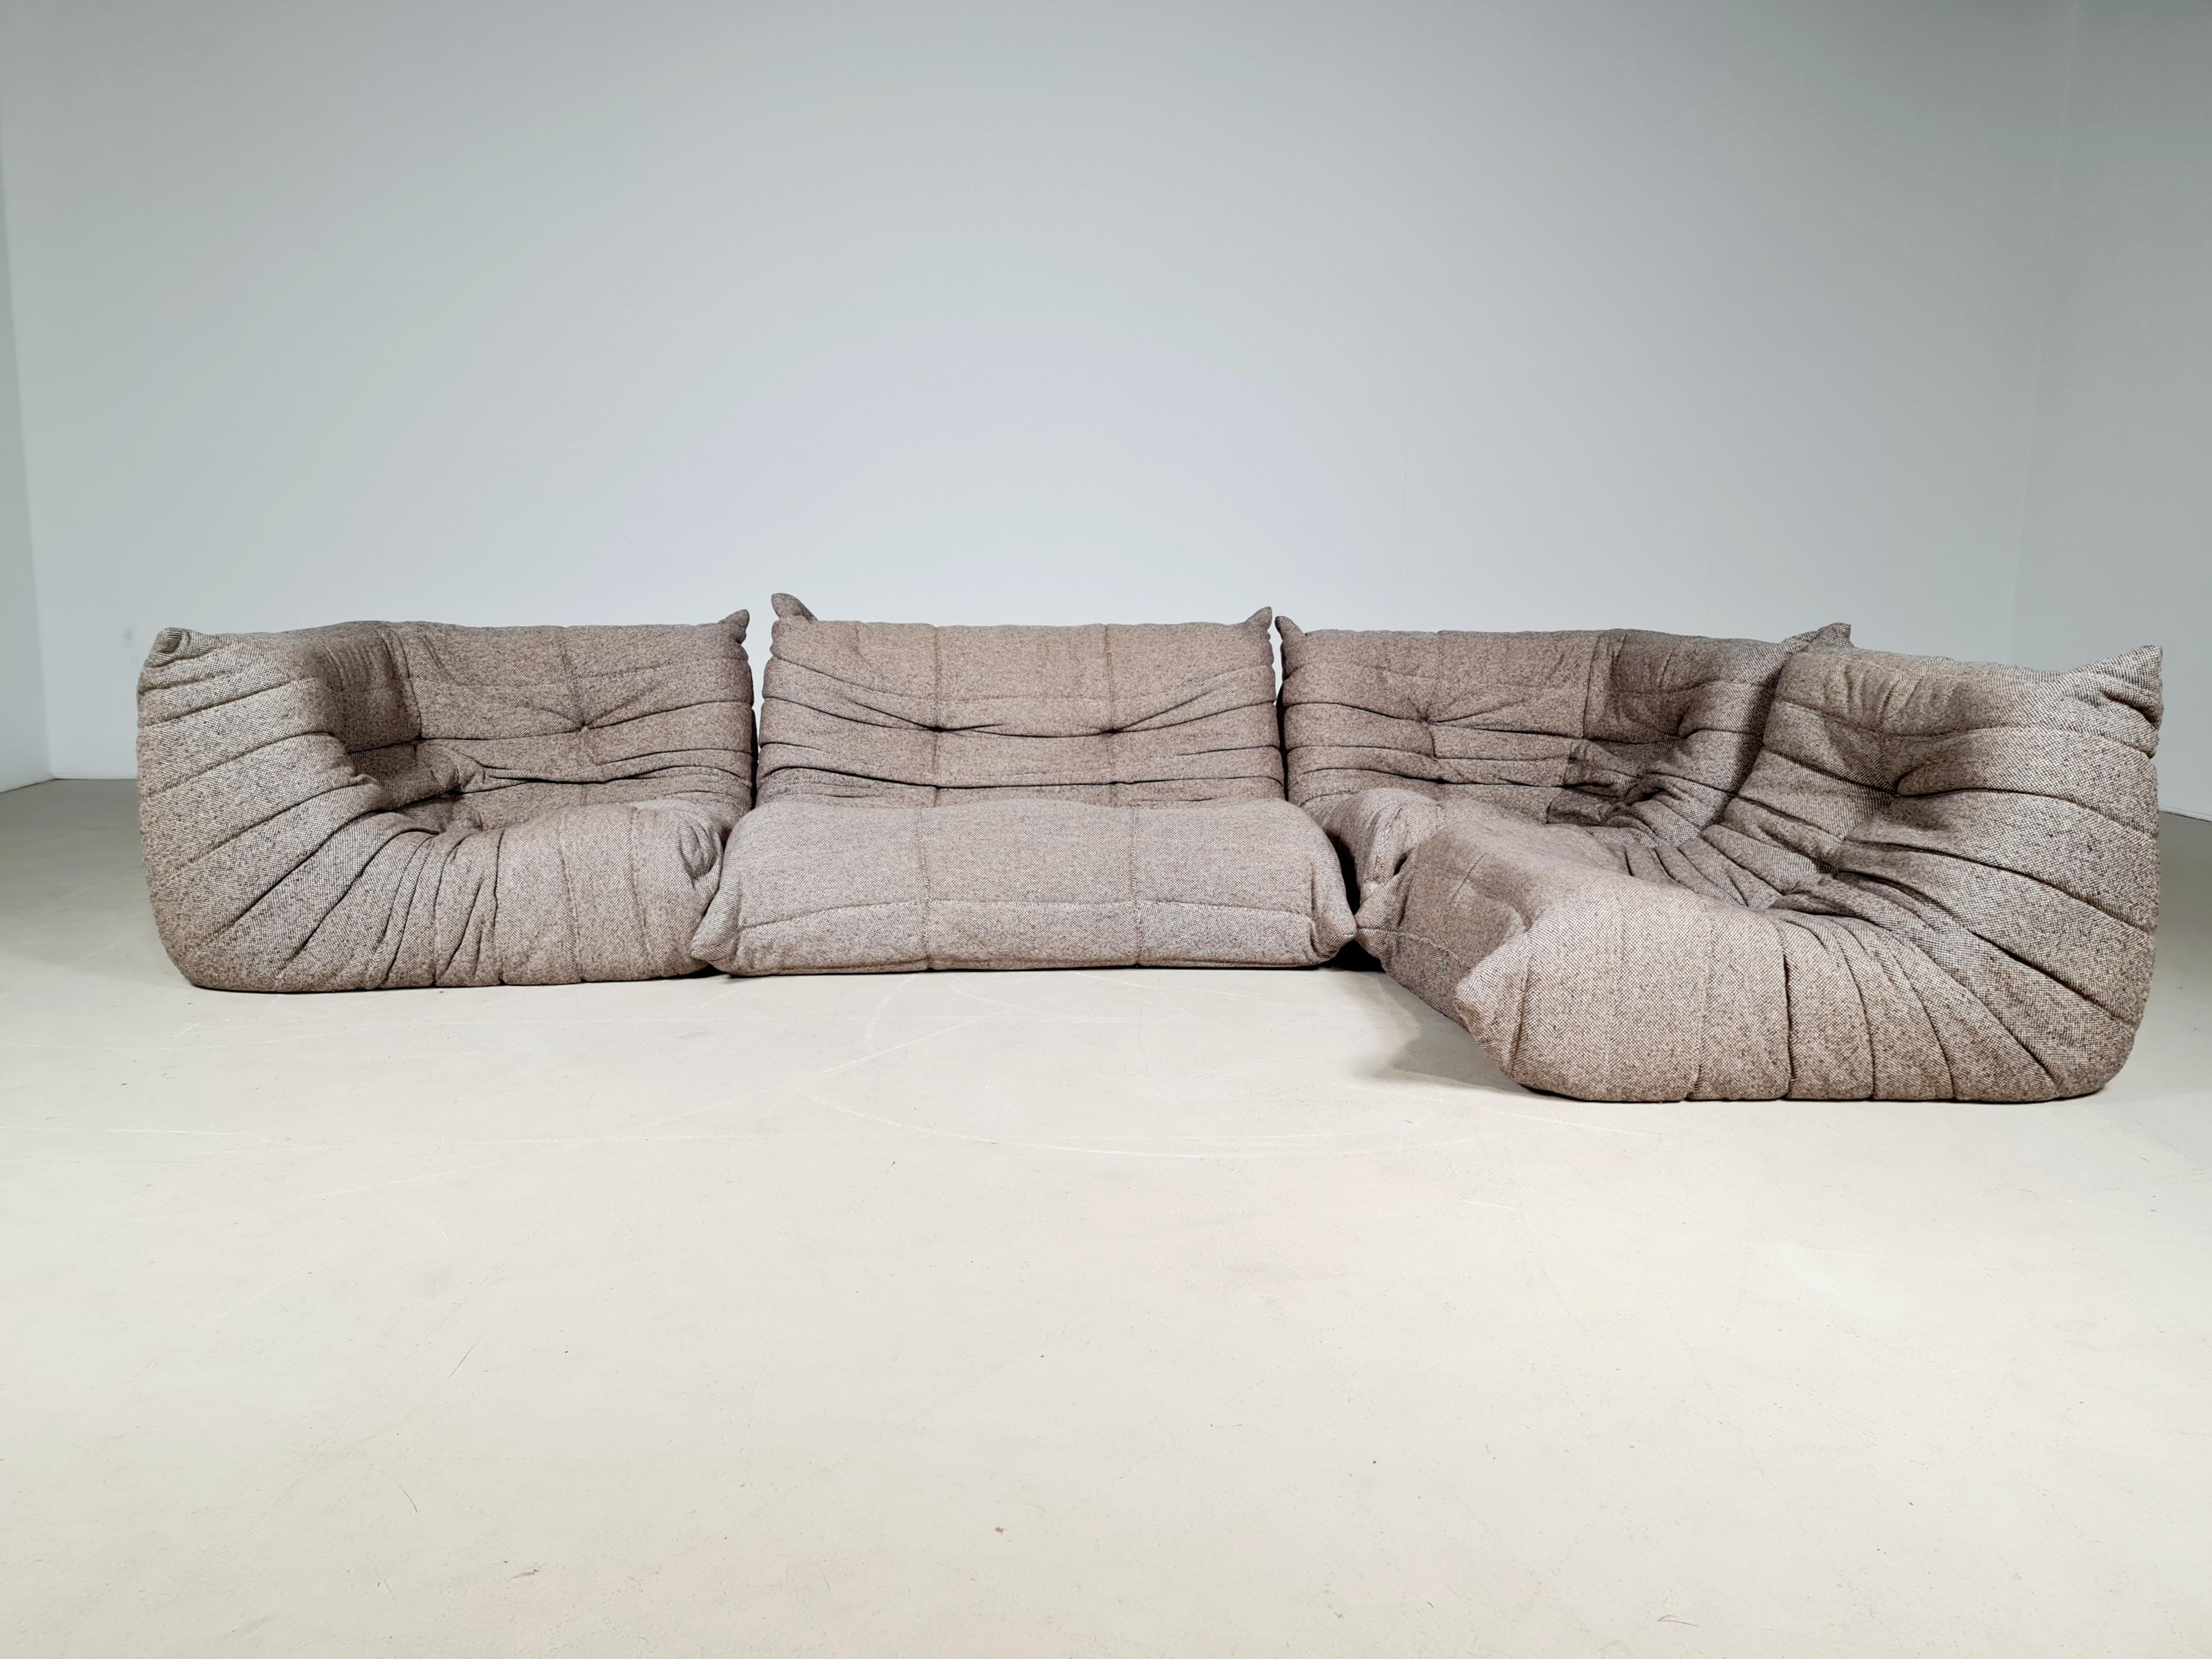 Original Togo vintage sofa designed by Michel Ducaroy in the 1970s for Ligne Roset.
The corner sofa shows a nice natural color tone and its famous wrinkled cozy design.
Labeled at the back and lined underneath with original fabric. The original